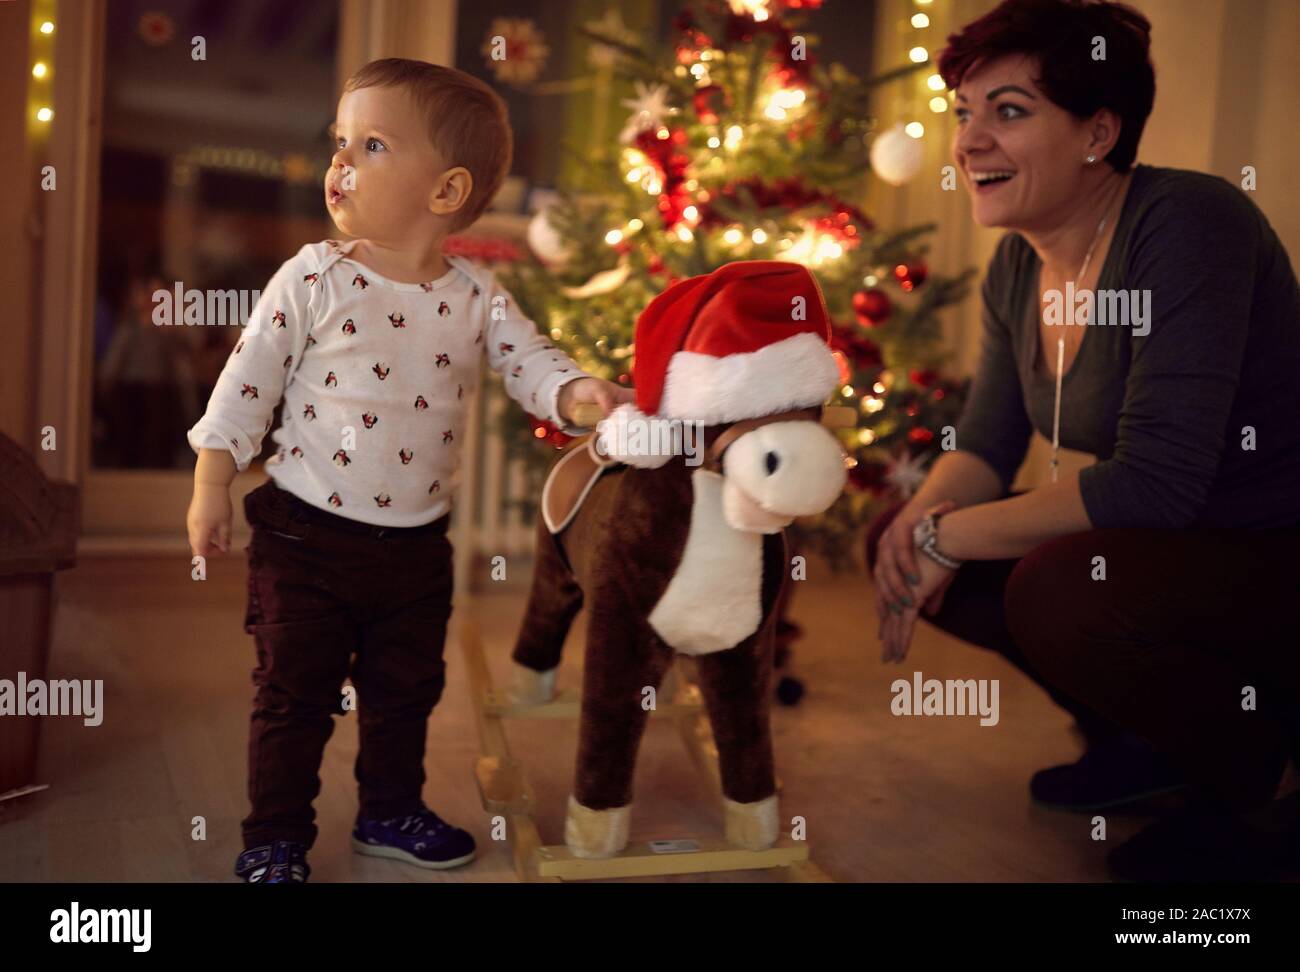 Suprised baby and his toy horse by the decorated Christmas tree Stock Photo